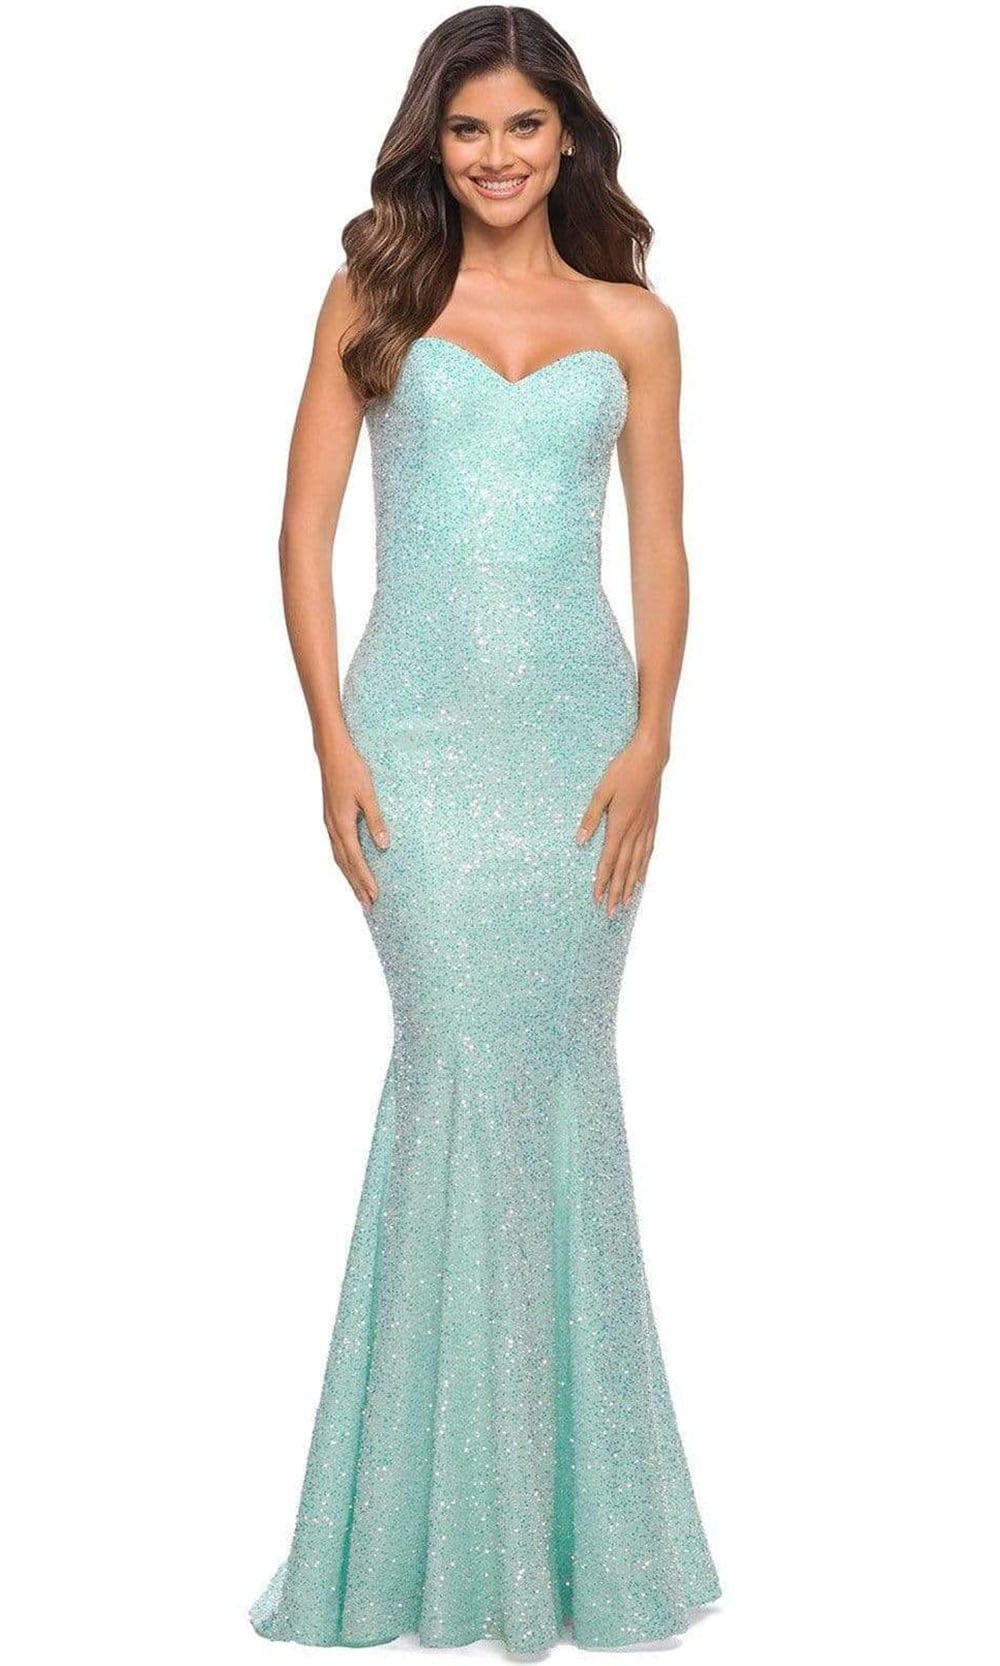 Image of La Femme - 30743 Sequined Sweetheart Long Gown